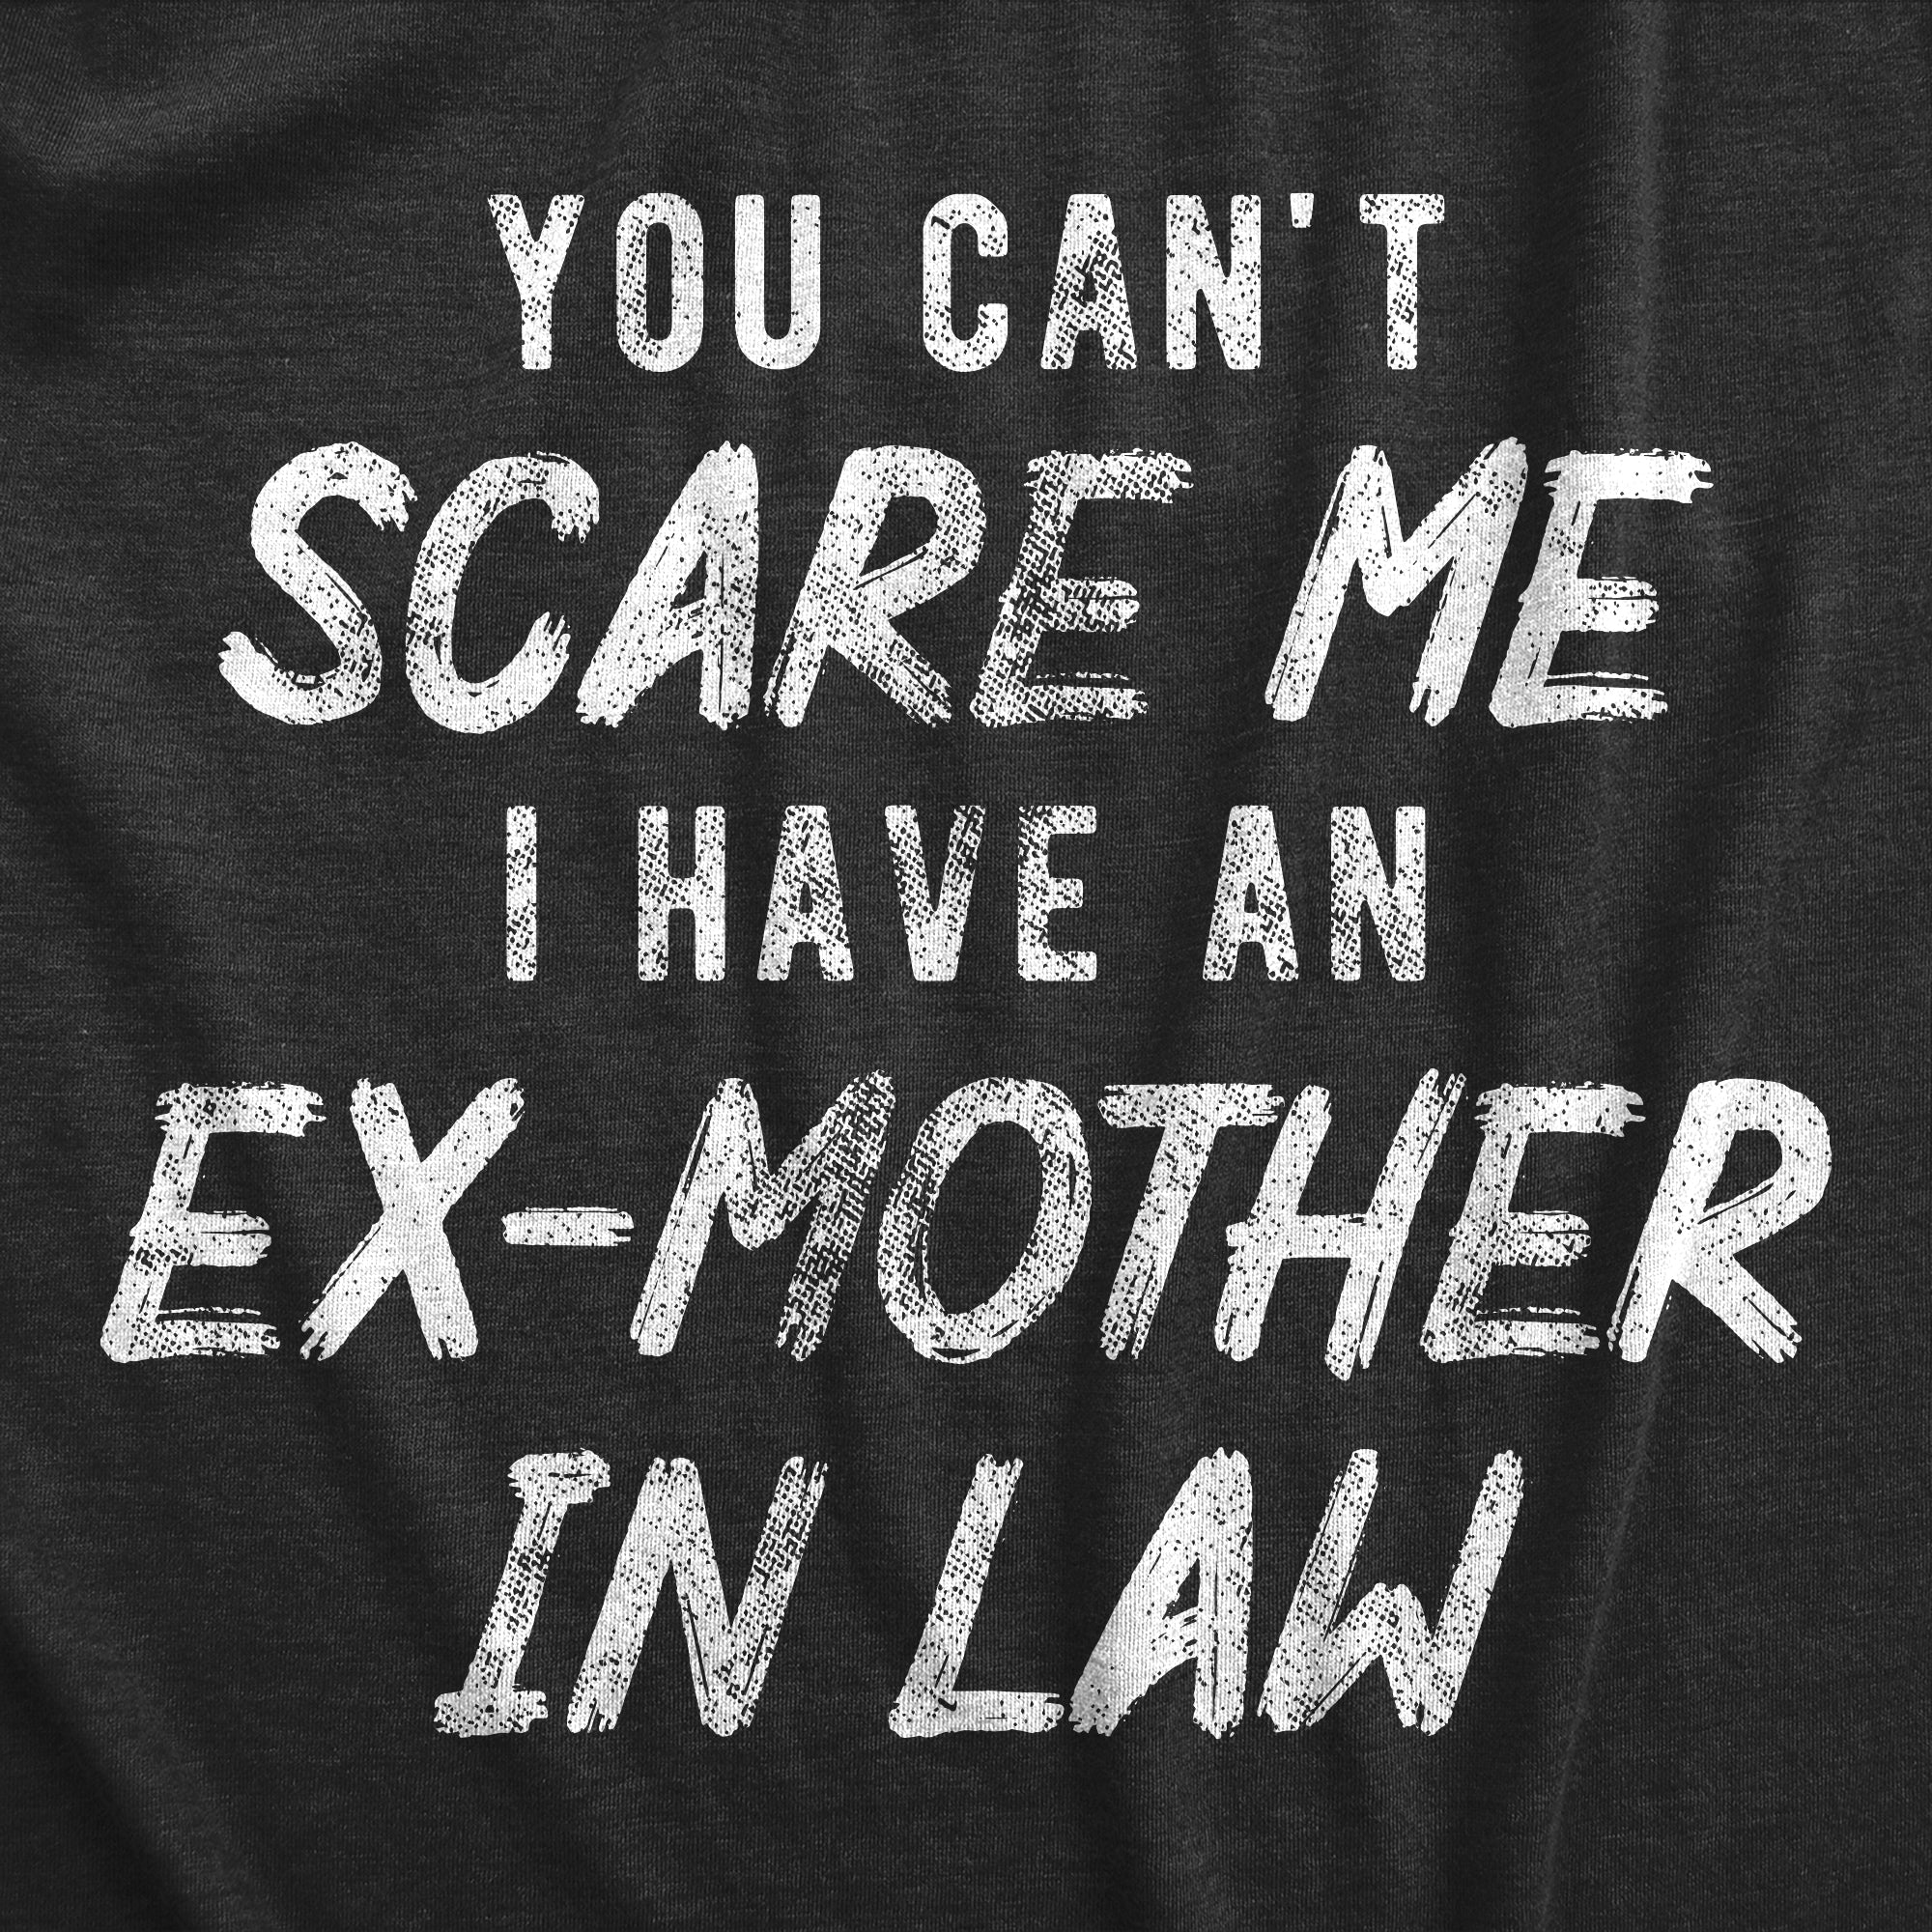 Funny Heather Black - EX You Cant Scare Me I Have An Ex Mother In Law Mens T Shirt Nerdy Sarcastic Tee